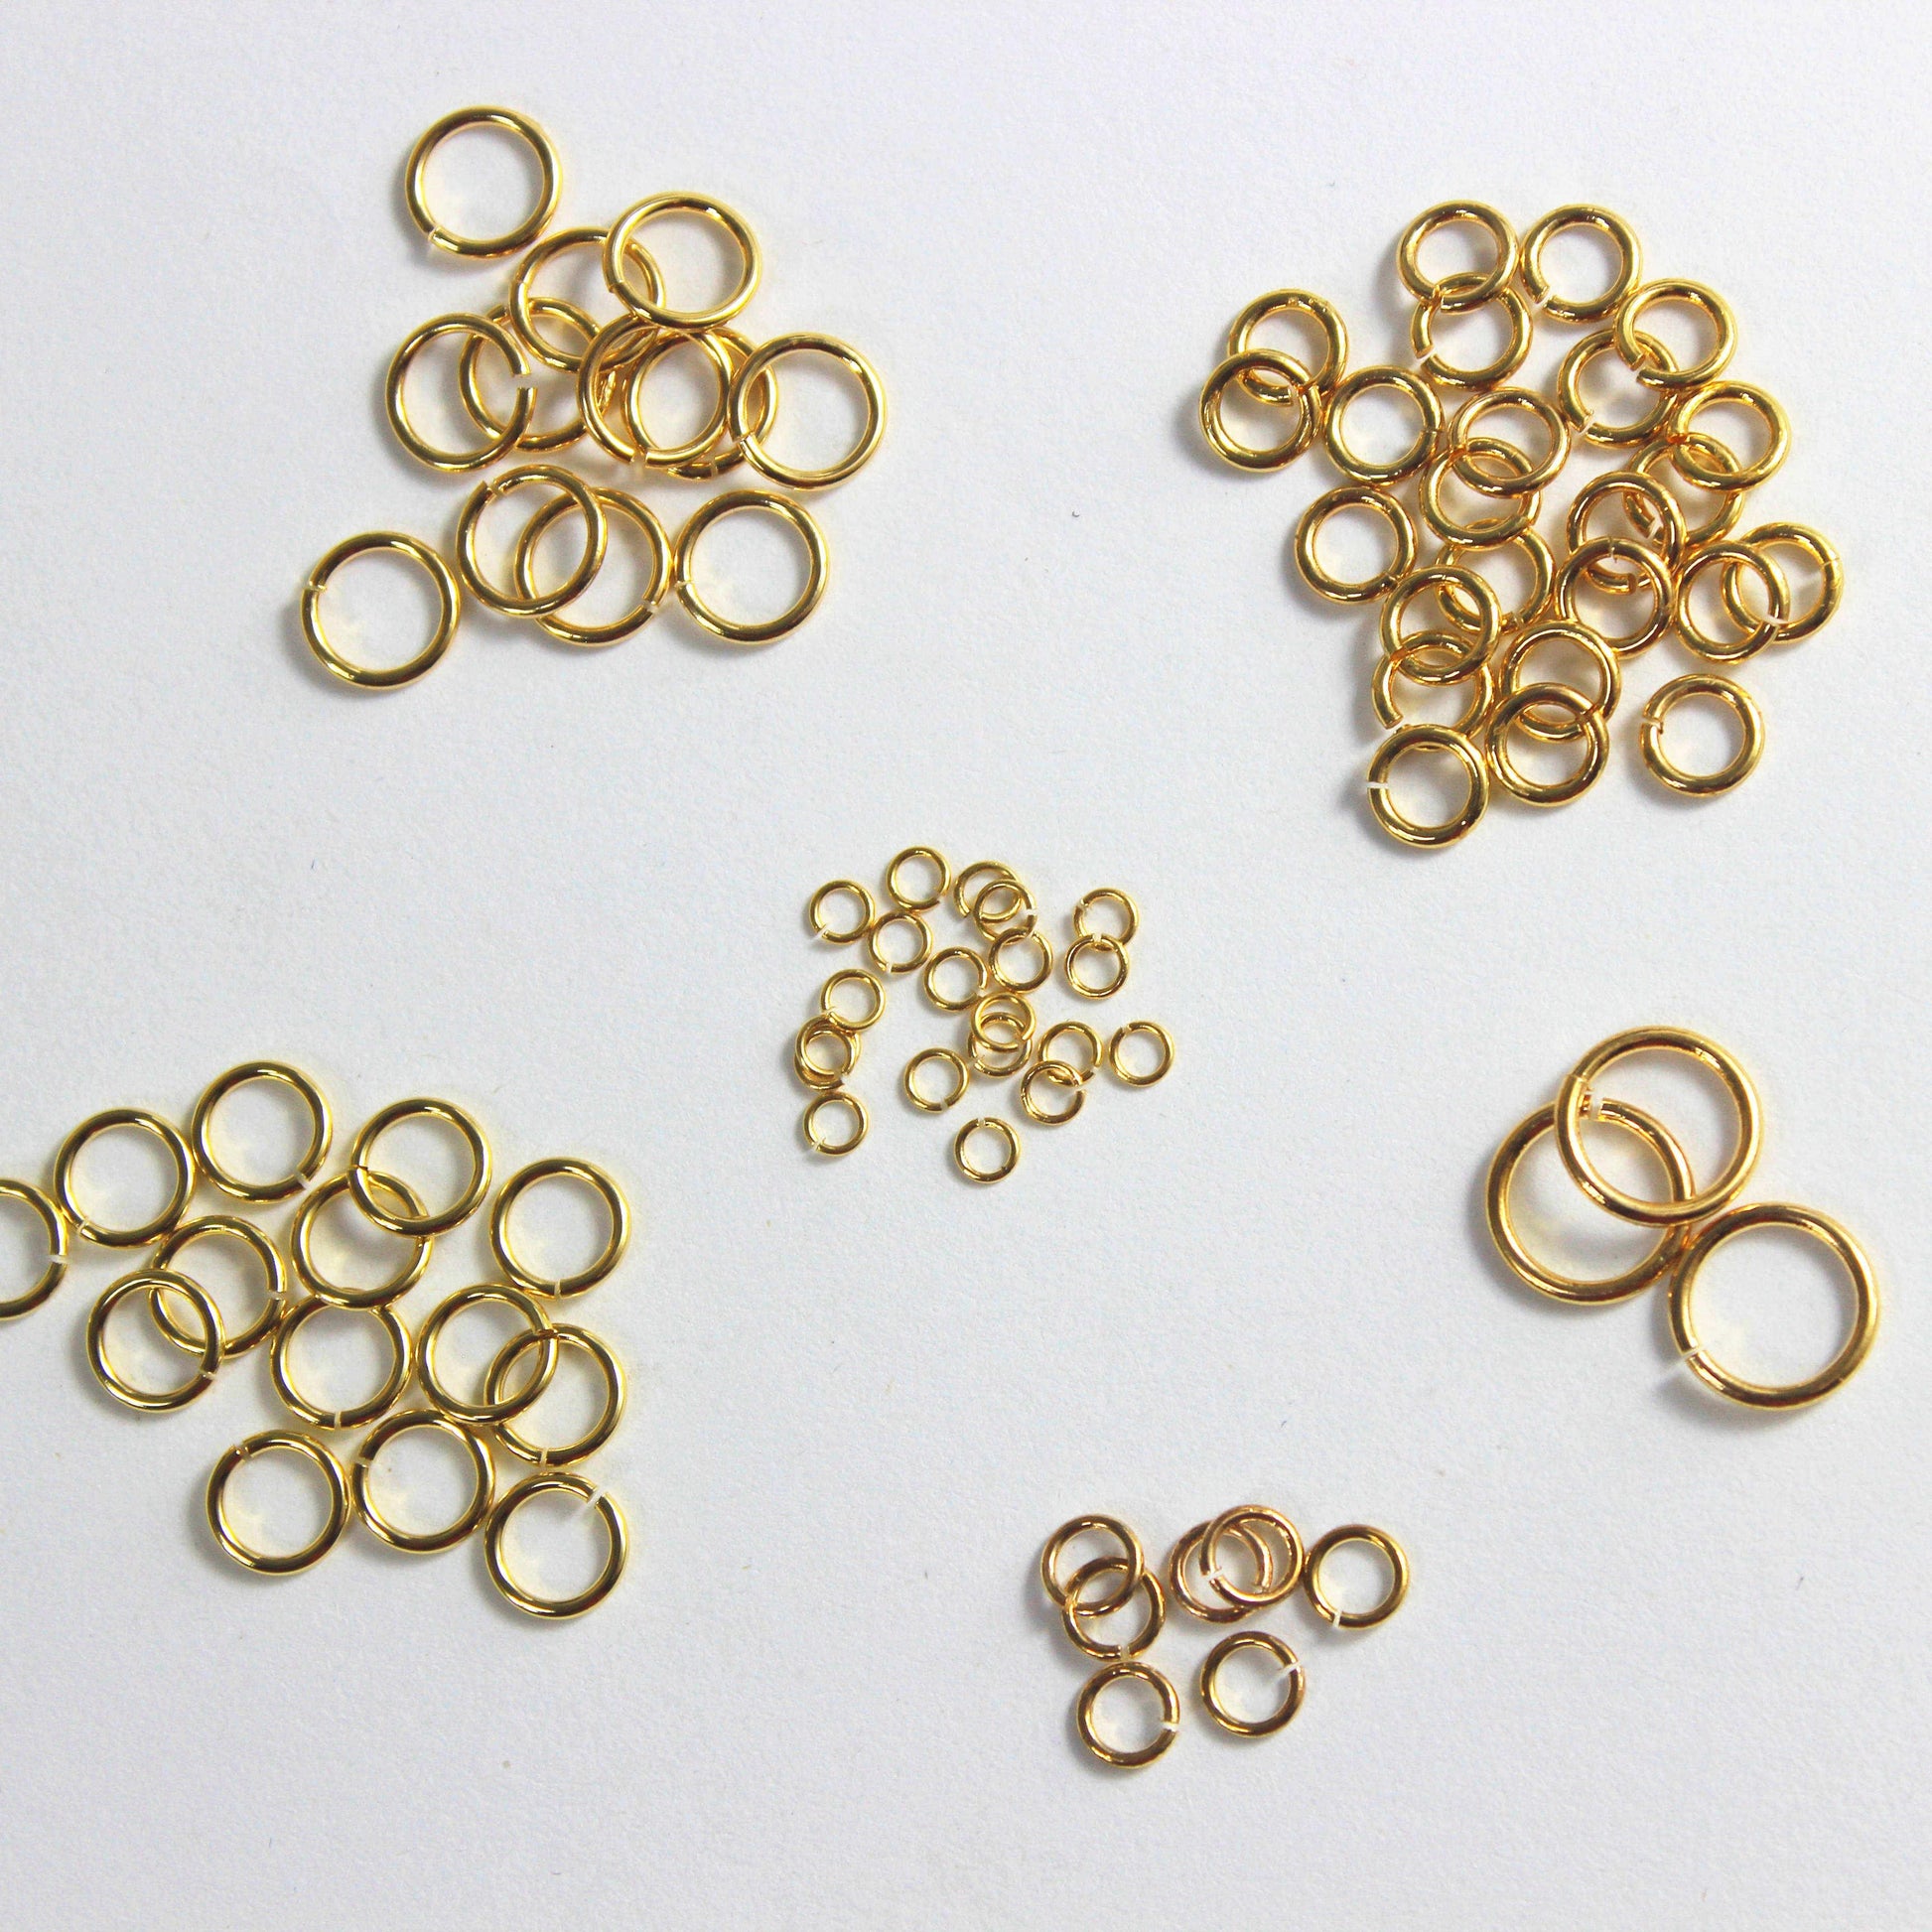 Gold-Filled Jump Ring Series